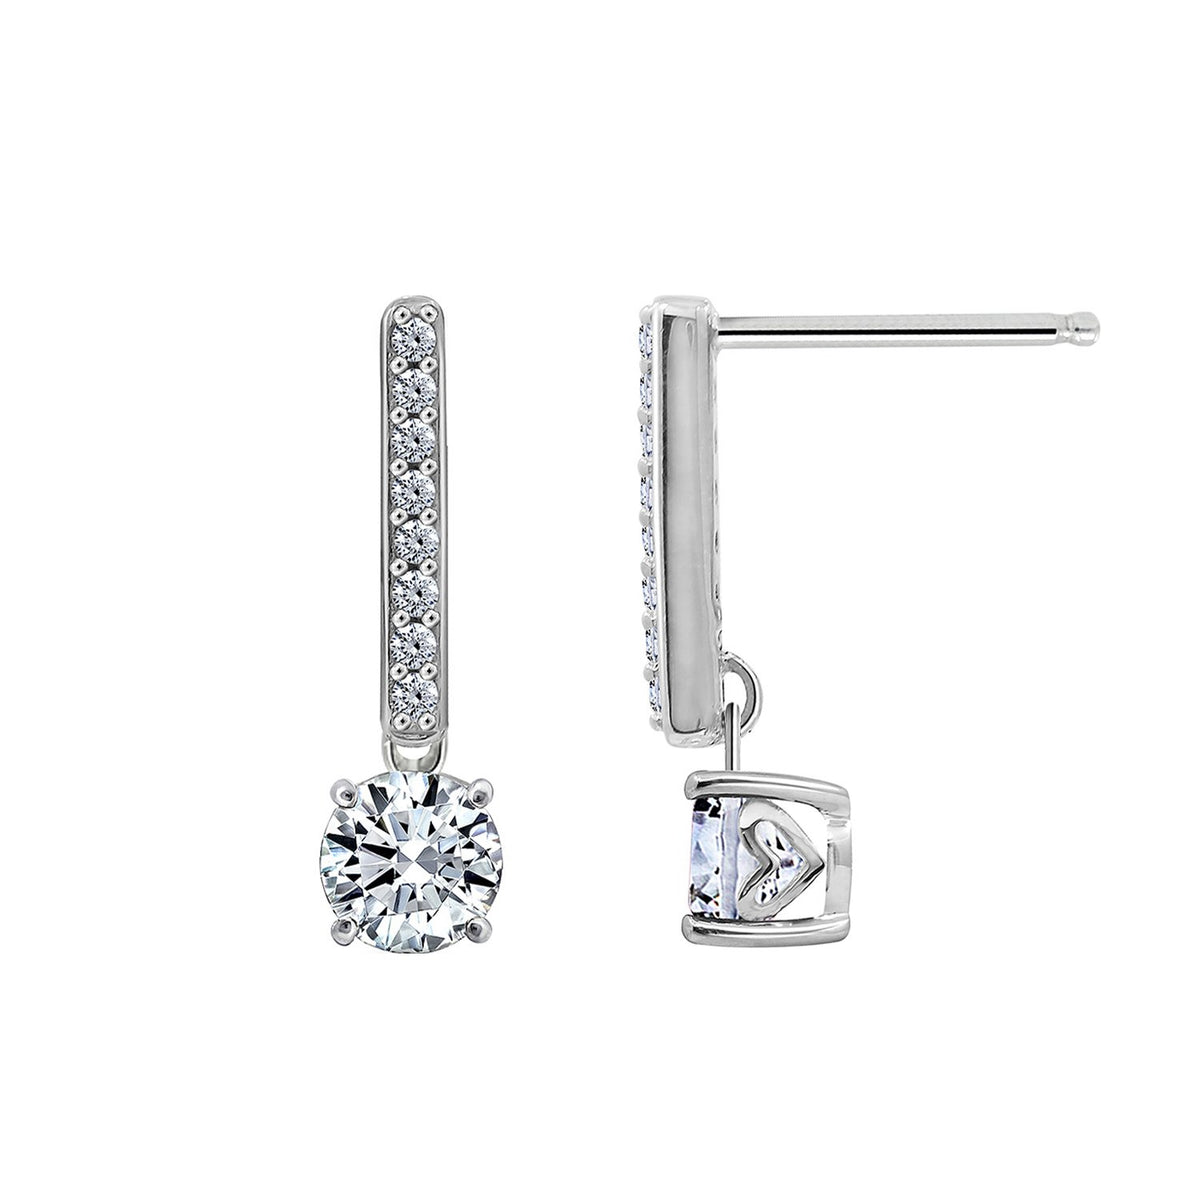 GEMOUR Cubic Zirconia Pave Bar with Round Stone Drop Earrings - GEMOUR